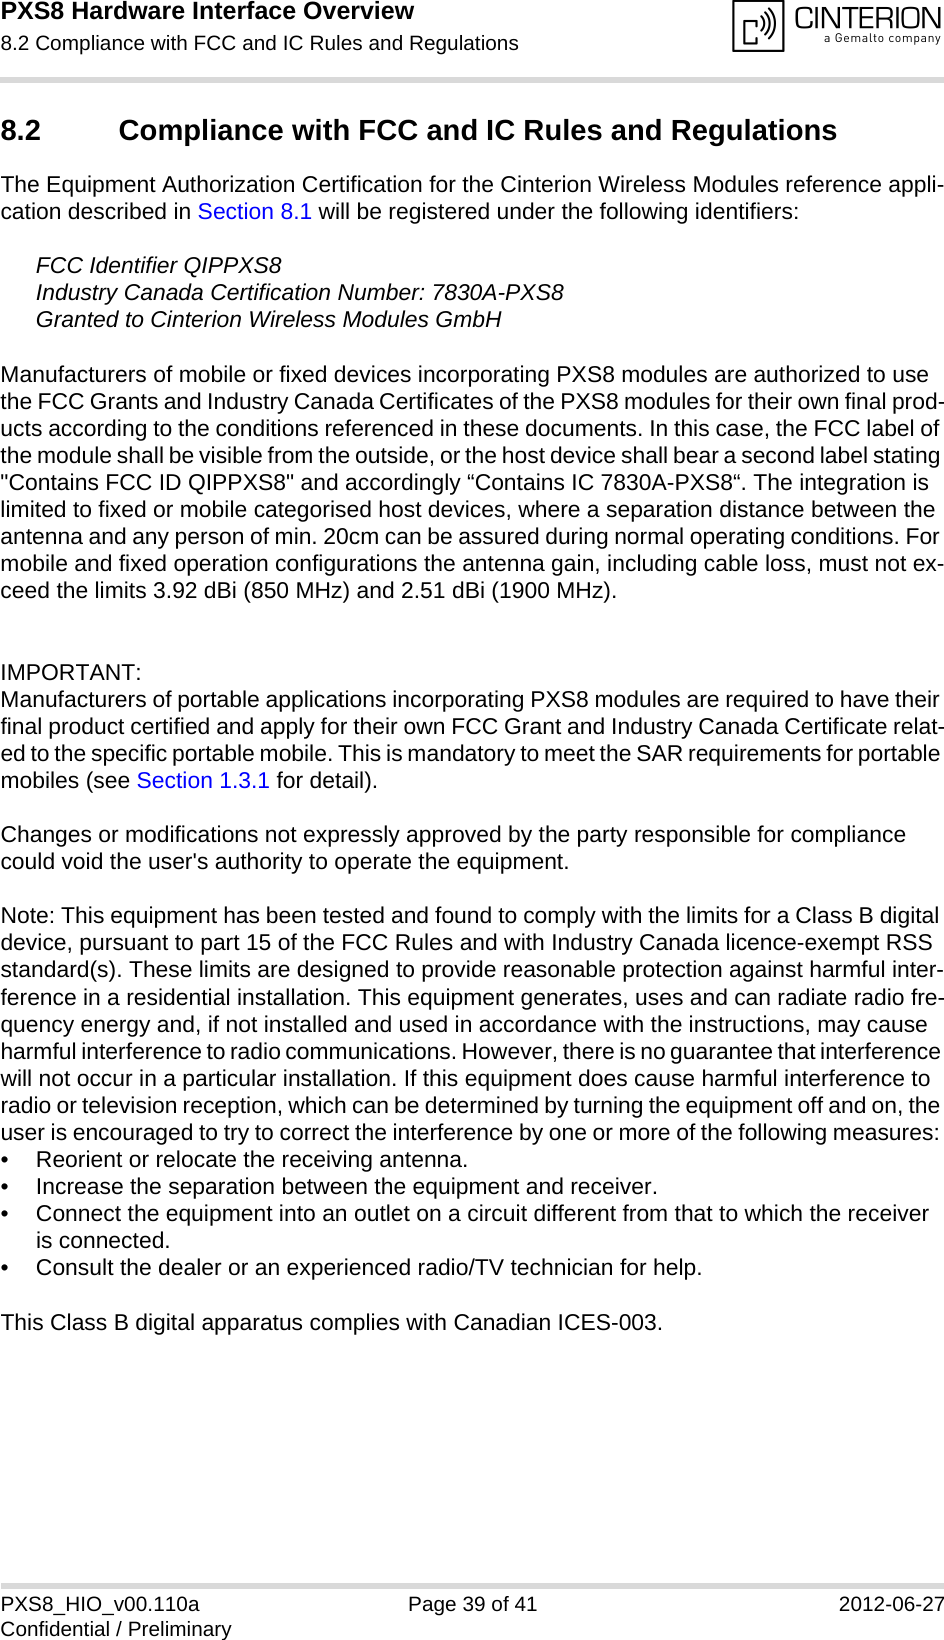 PXS8 Hardware Interface Overview8.2 Compliance with FCC and IC Rules and Regulations39PXS8_HIO_v00.110a Page 39 of 41 2012-06-27Confidential / Preliminary8.2 Compliance with FCC and IC Rules and Regulations The Equipment Authorization Certification for the Cinterion Wireless Modules reference appli-cation described in Section 8.1 will be registered under the following identifiers:FCC Identifier QIPPXS8Industry Canada Certification Number: 7830A-PXS8Granted to Cinterion Wireless Modules GmbH Manufacturers of mobile or fixed devices incorporating PXS8 modules are authorized to use the FCC Grants and Industry Canada Certificates of the PXS8 modules for their own final prod-ucts according to the conditions referenced in these documents. In this case, the FCC label of the module shall be visible from the outside, or the host device shall bear a second label stating &quot;Contains FCC ID QIPPXS8&quot; and accordingly “Contains IC 7830A-PXS8“. The integration is limited to fixed or mobile categorised host devices, where a separation distance between the antenna and any person of min. 20cm can be assured during normal operating conditions. For mobile and fixed operation configurations the antenna gain, including cable loss, must not ex-ceed the limits 3.92 dBi (850 MHz) and 2.51 dBi (1900 MHz).IMPORTANT:Manufacturers of portable applications incorporating PXS8 modules are required to have their final product certified and apply for their own FCC Grant and Industry Canada Certificate relat-ed to the specific portable mobile. This is mandatory to meet the SAR requirements for portable mobiles (see Section 1.3.1 for detail).Changes or modifications not expressly approved by the party responsible for compliance could void the user&apos;s authority to operate the equipment.Note: This equipment has been tested and found to comply with the limits for a Class B digital device, pursuant to part 15 of the FCC Rules and with Industry Canada licence-exempt RSS standard(s). These limits are designed to provide reasonable protection against harmful inter-ference in a residential installation. This equipment generates, uses and can radiate radio fre-quency energy and, if not installed and used in accordance with the instructions, may cause harmful interference to radio communications. However, there is no guarantee that interference will not occur in a particular installation. If this equipment does cause harmful interference to radio or television reception, which can be determined by turning the equipment off and on, the user is encouraged to try to correct the interference by one or more of the following measures: • Reorient or relocate the receiving antenna. • Increase the separation between the equipment and receiver. • Connect the equipment into an outlet on a circuit different from that to which the receiver is connected. • Consult the dealer or an experienced radio/TV technician for help.This Class B digital apparatus complies with Canadian ICES-003.